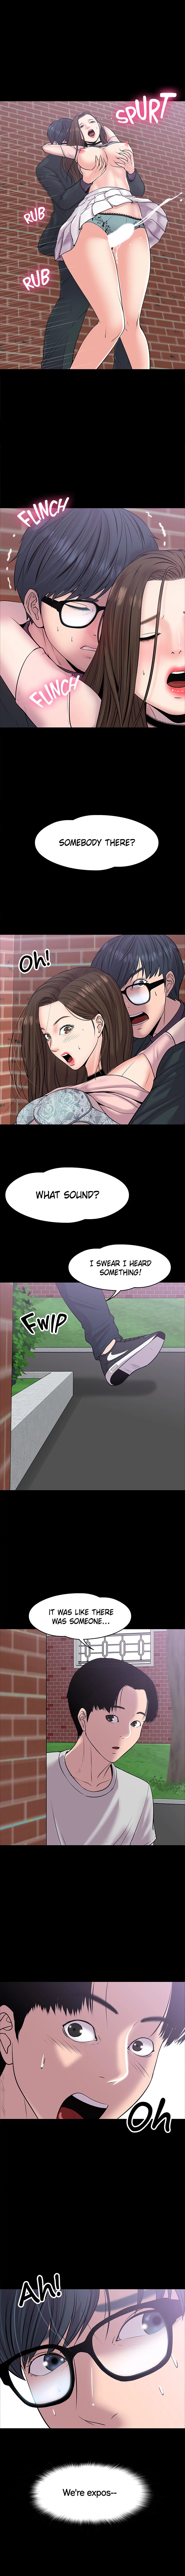 Are You Just Going To Watch? - Chapter 9 Page 3